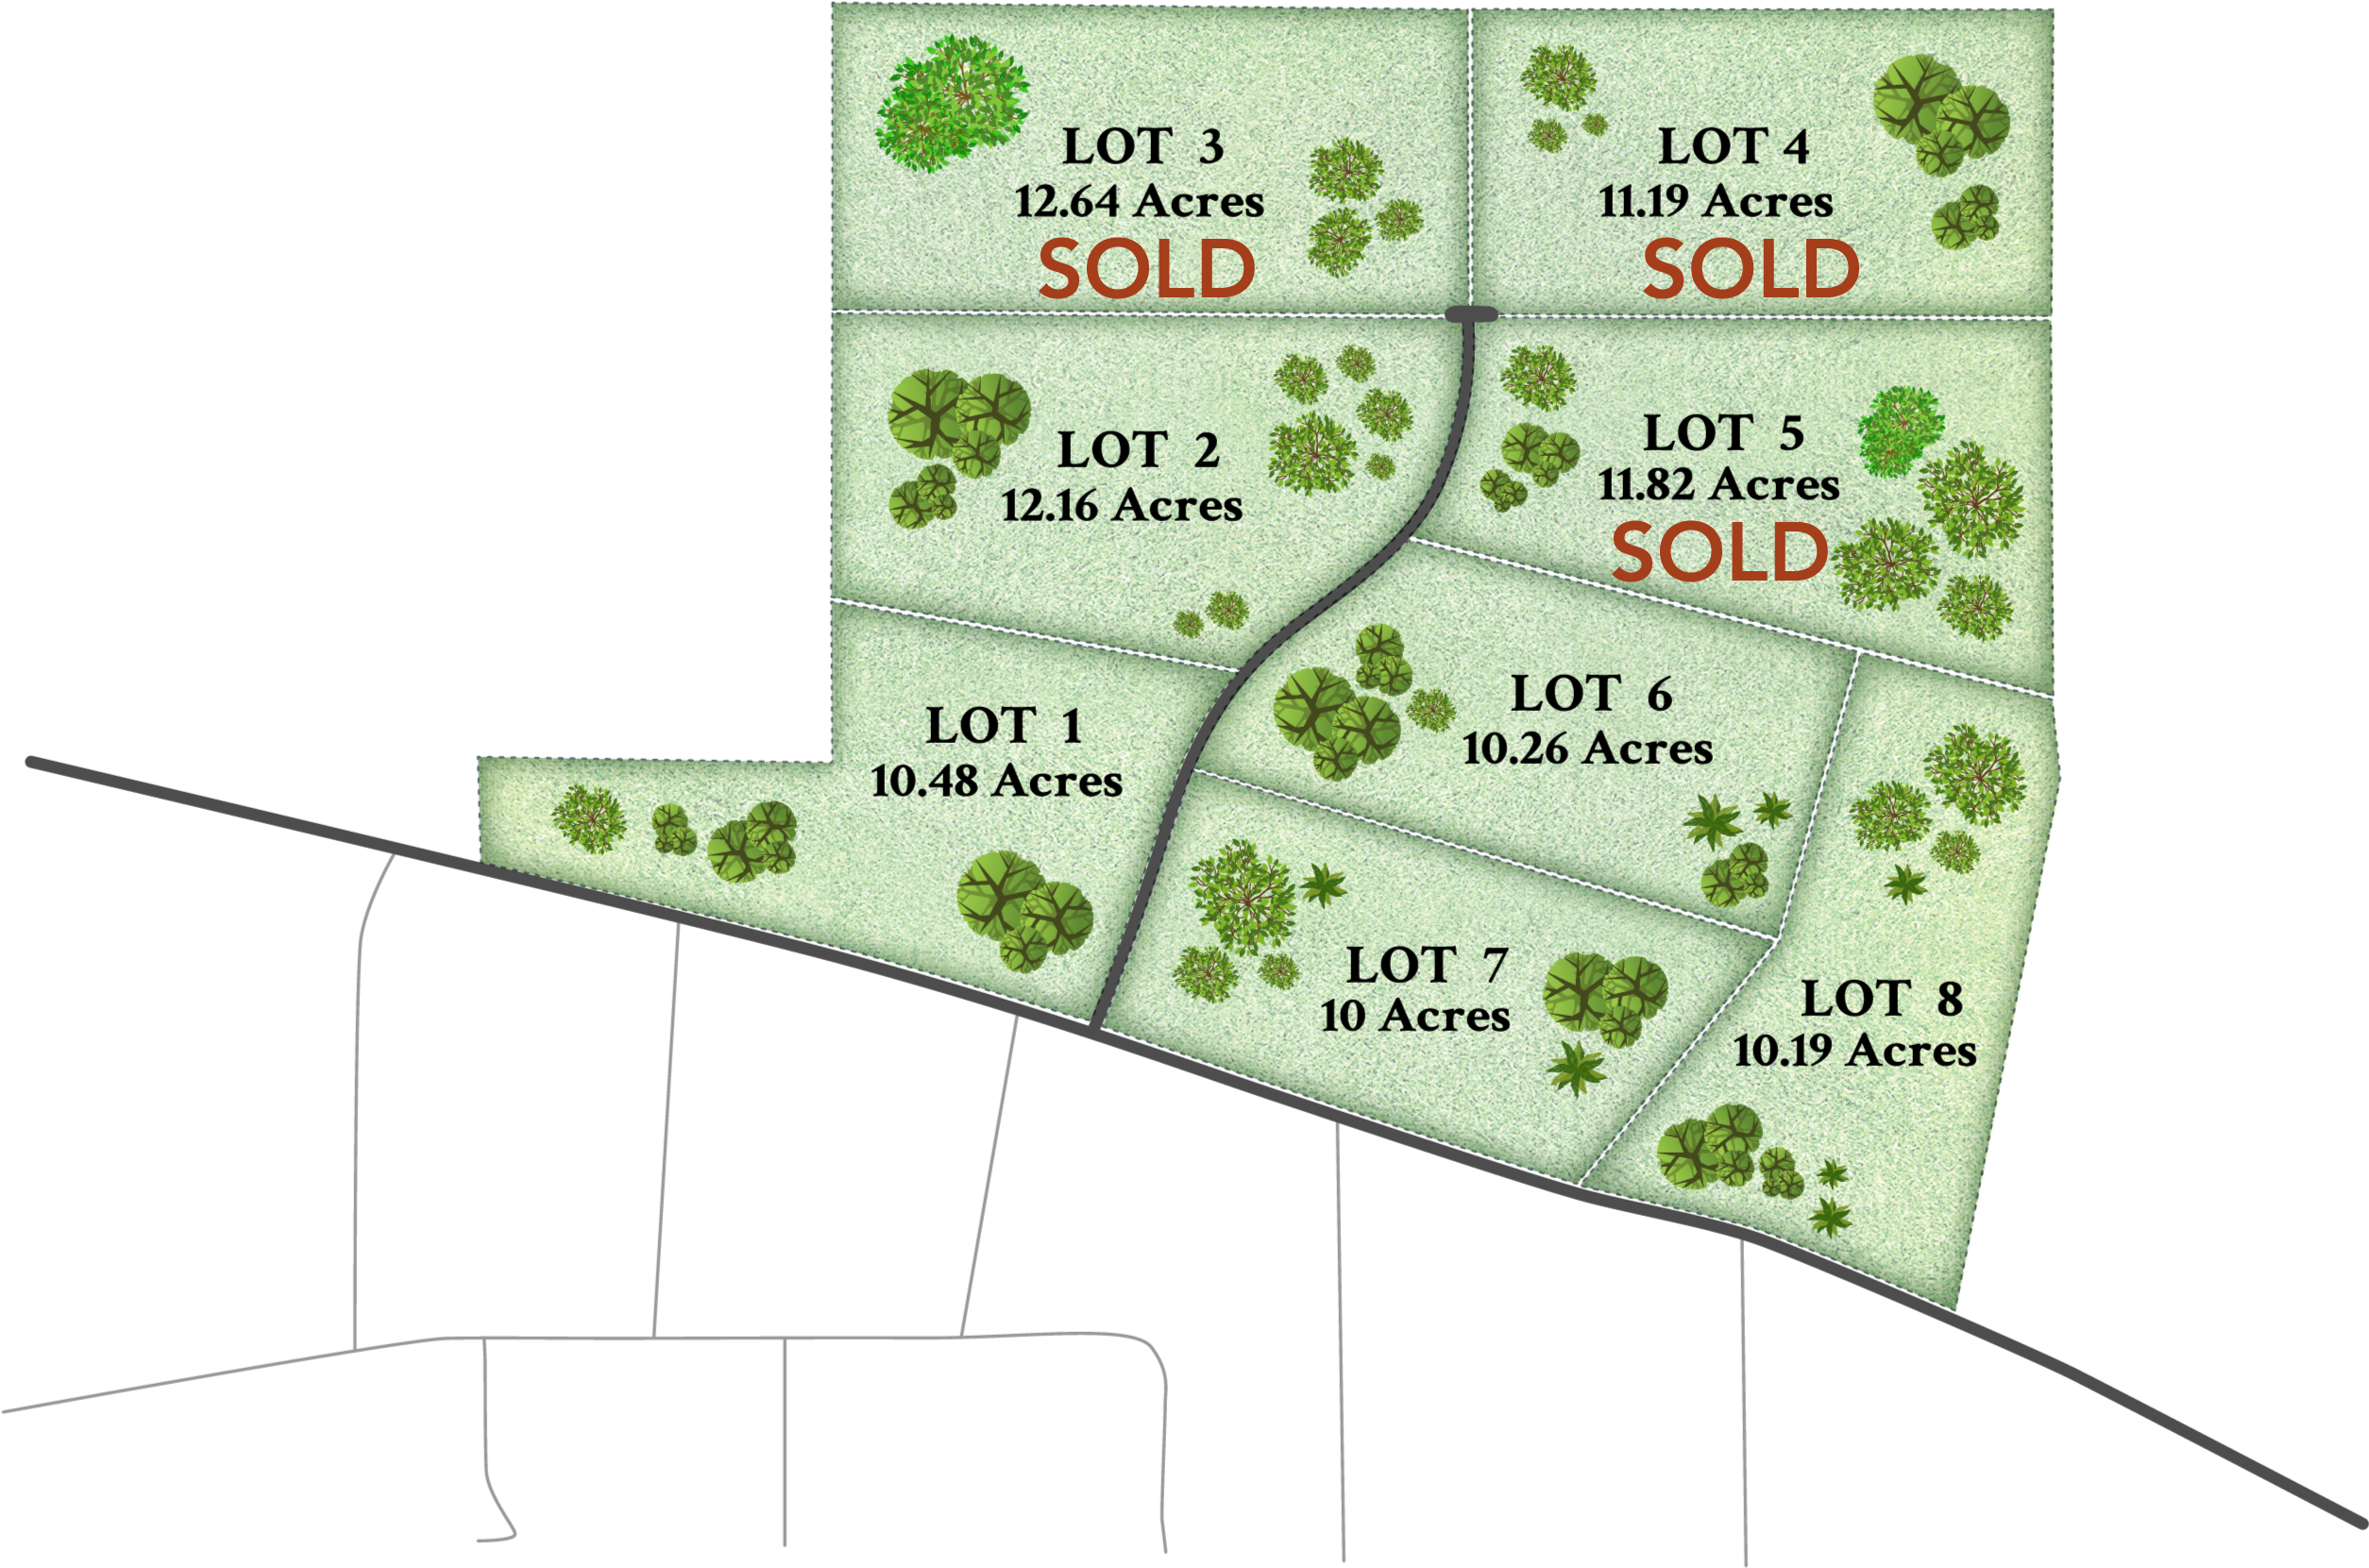 A map of Westfield Farms Lots– 3,4,5 are sold.